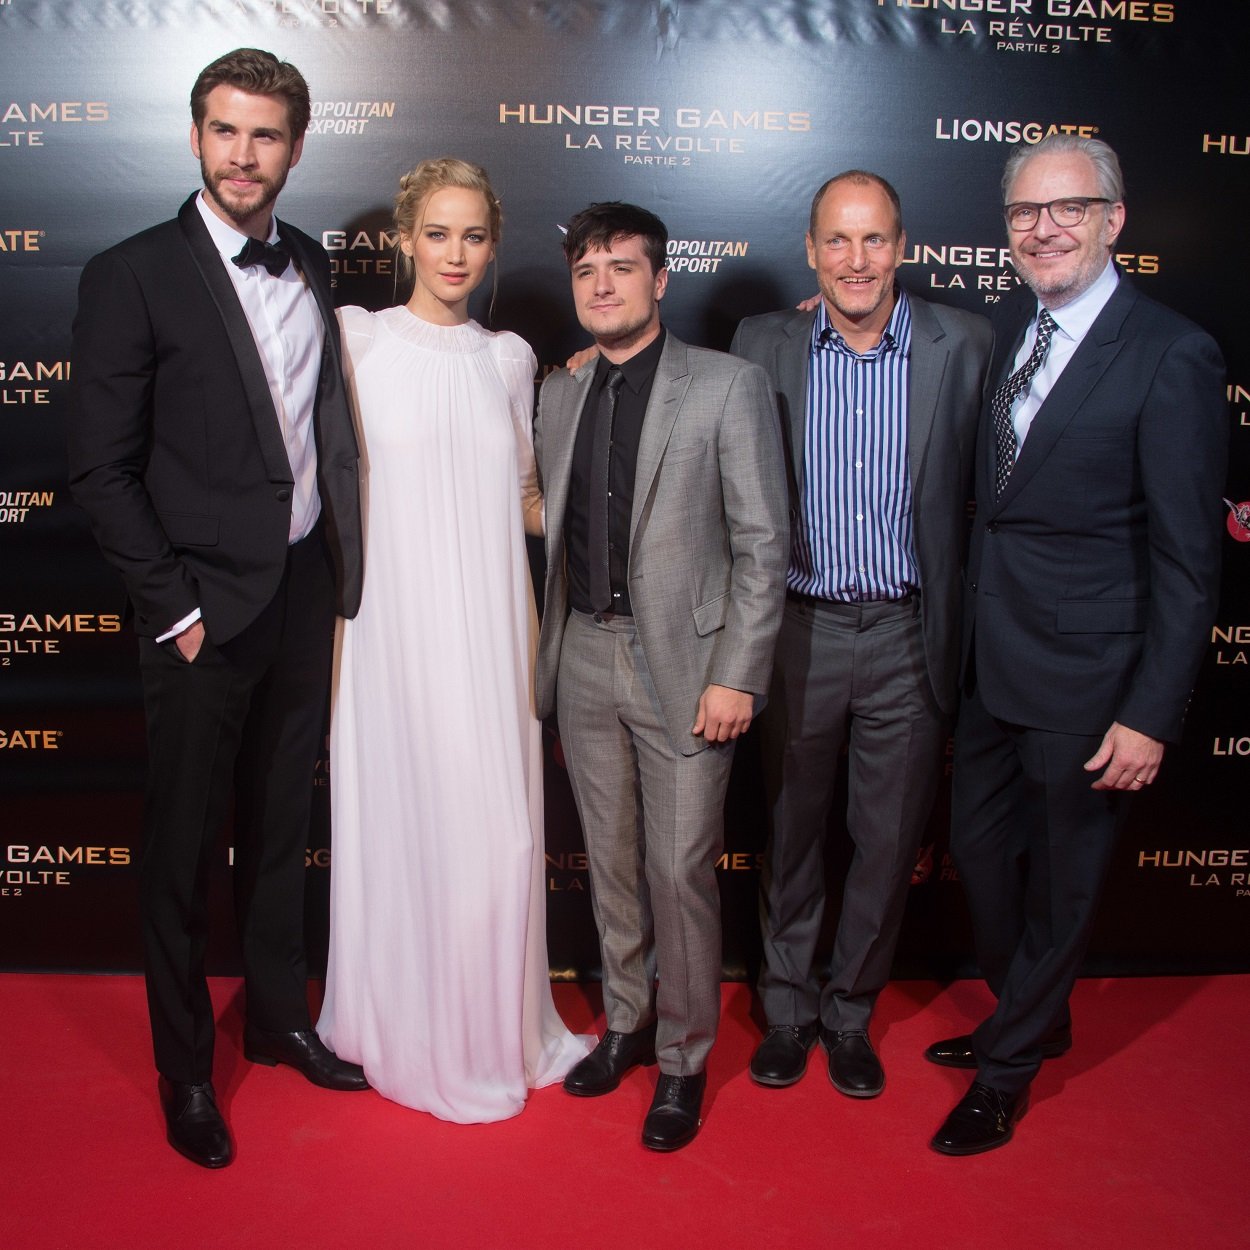 Liam Hemsworth, Jennifer Lawrence, Josh Hutcherson, Woody Harrelson, and Francis Lawrence at The Hunger Games Mockingjay Part 2 premiere in Paris